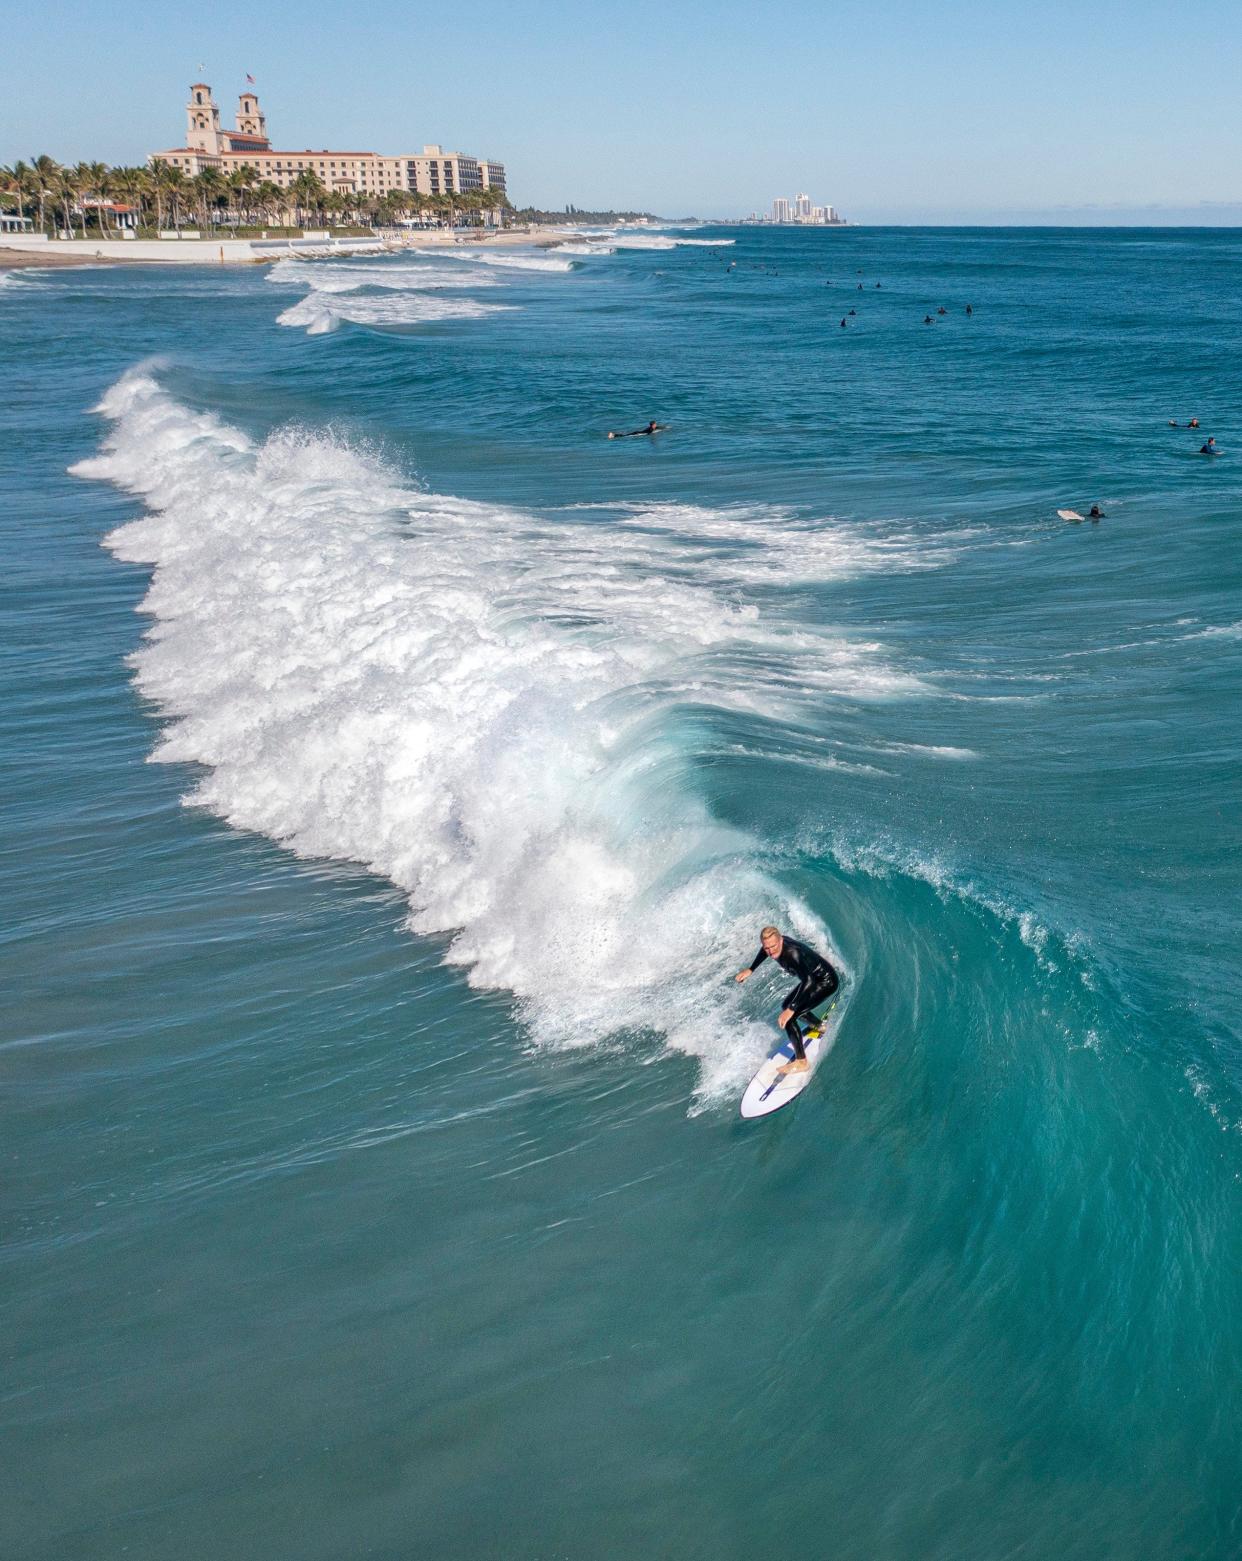 A surfer rides in the pocket of a wave at Midtown Beach in Palm Beach, Florida on Jan. 15, 2023. The Florida Department of Health in Palm Beach County on April 30 issued a no-swim advisory for Midtown Beach after high levels of bacteria were found in the water during routine testing on April 29.